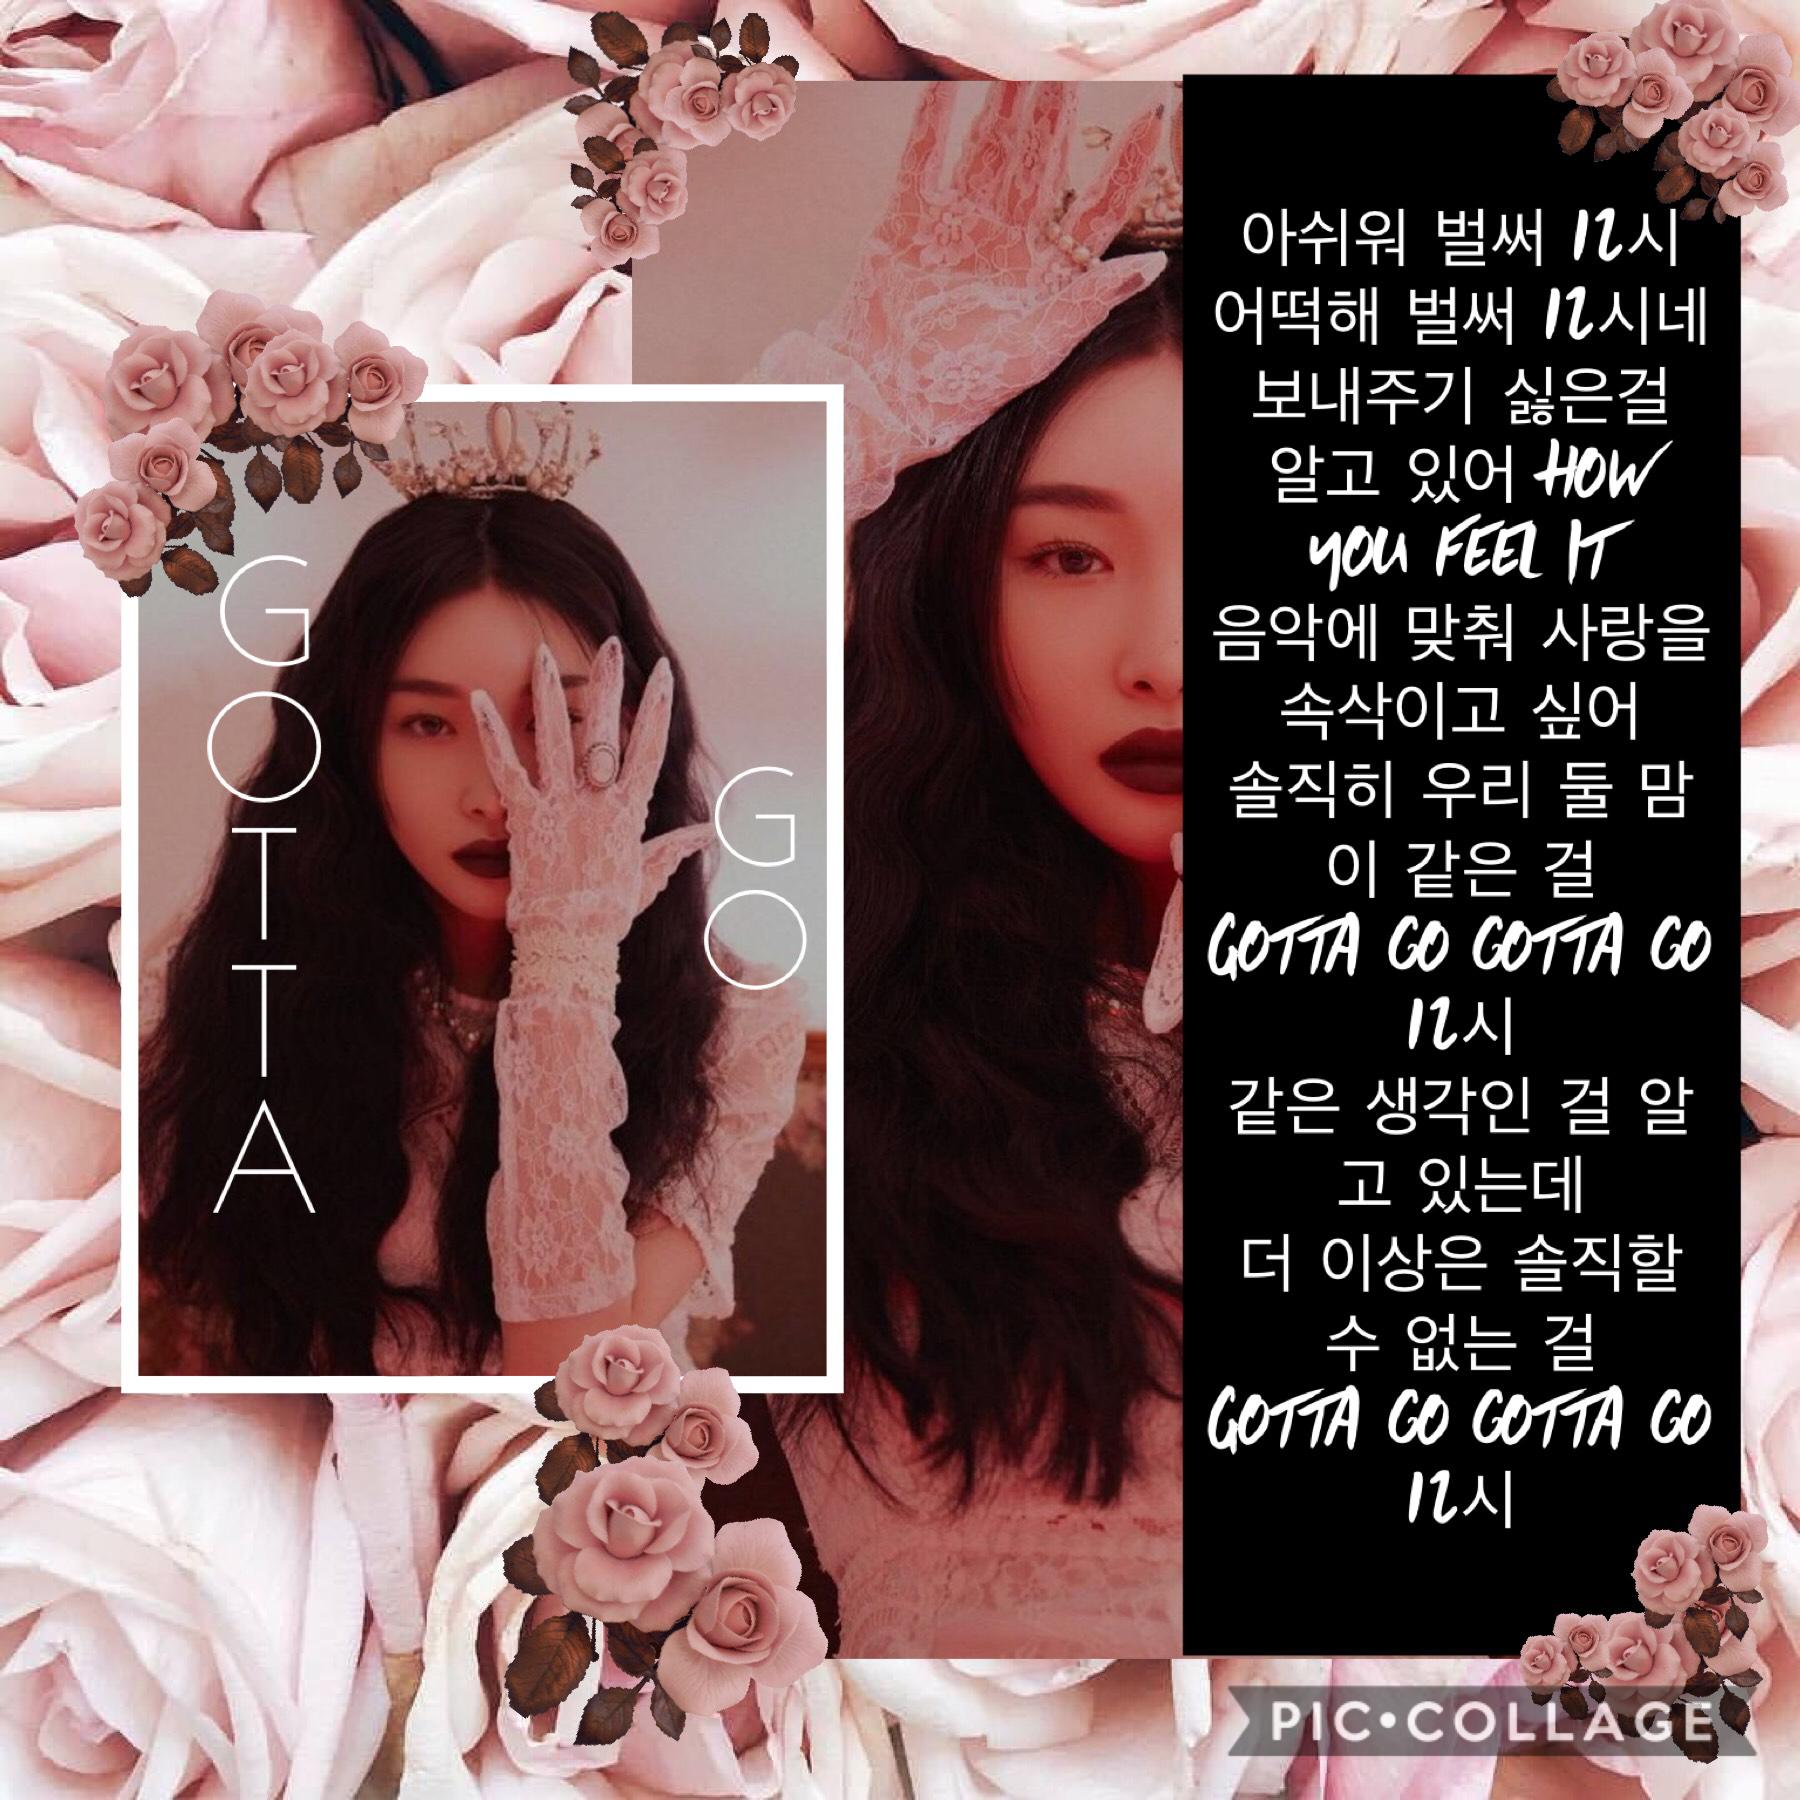 queen chungha🥀❤️ ~tap🎀~
This song gives strong Cindirella vibes but, Cindirella is a princess but Chungha is a queen👑